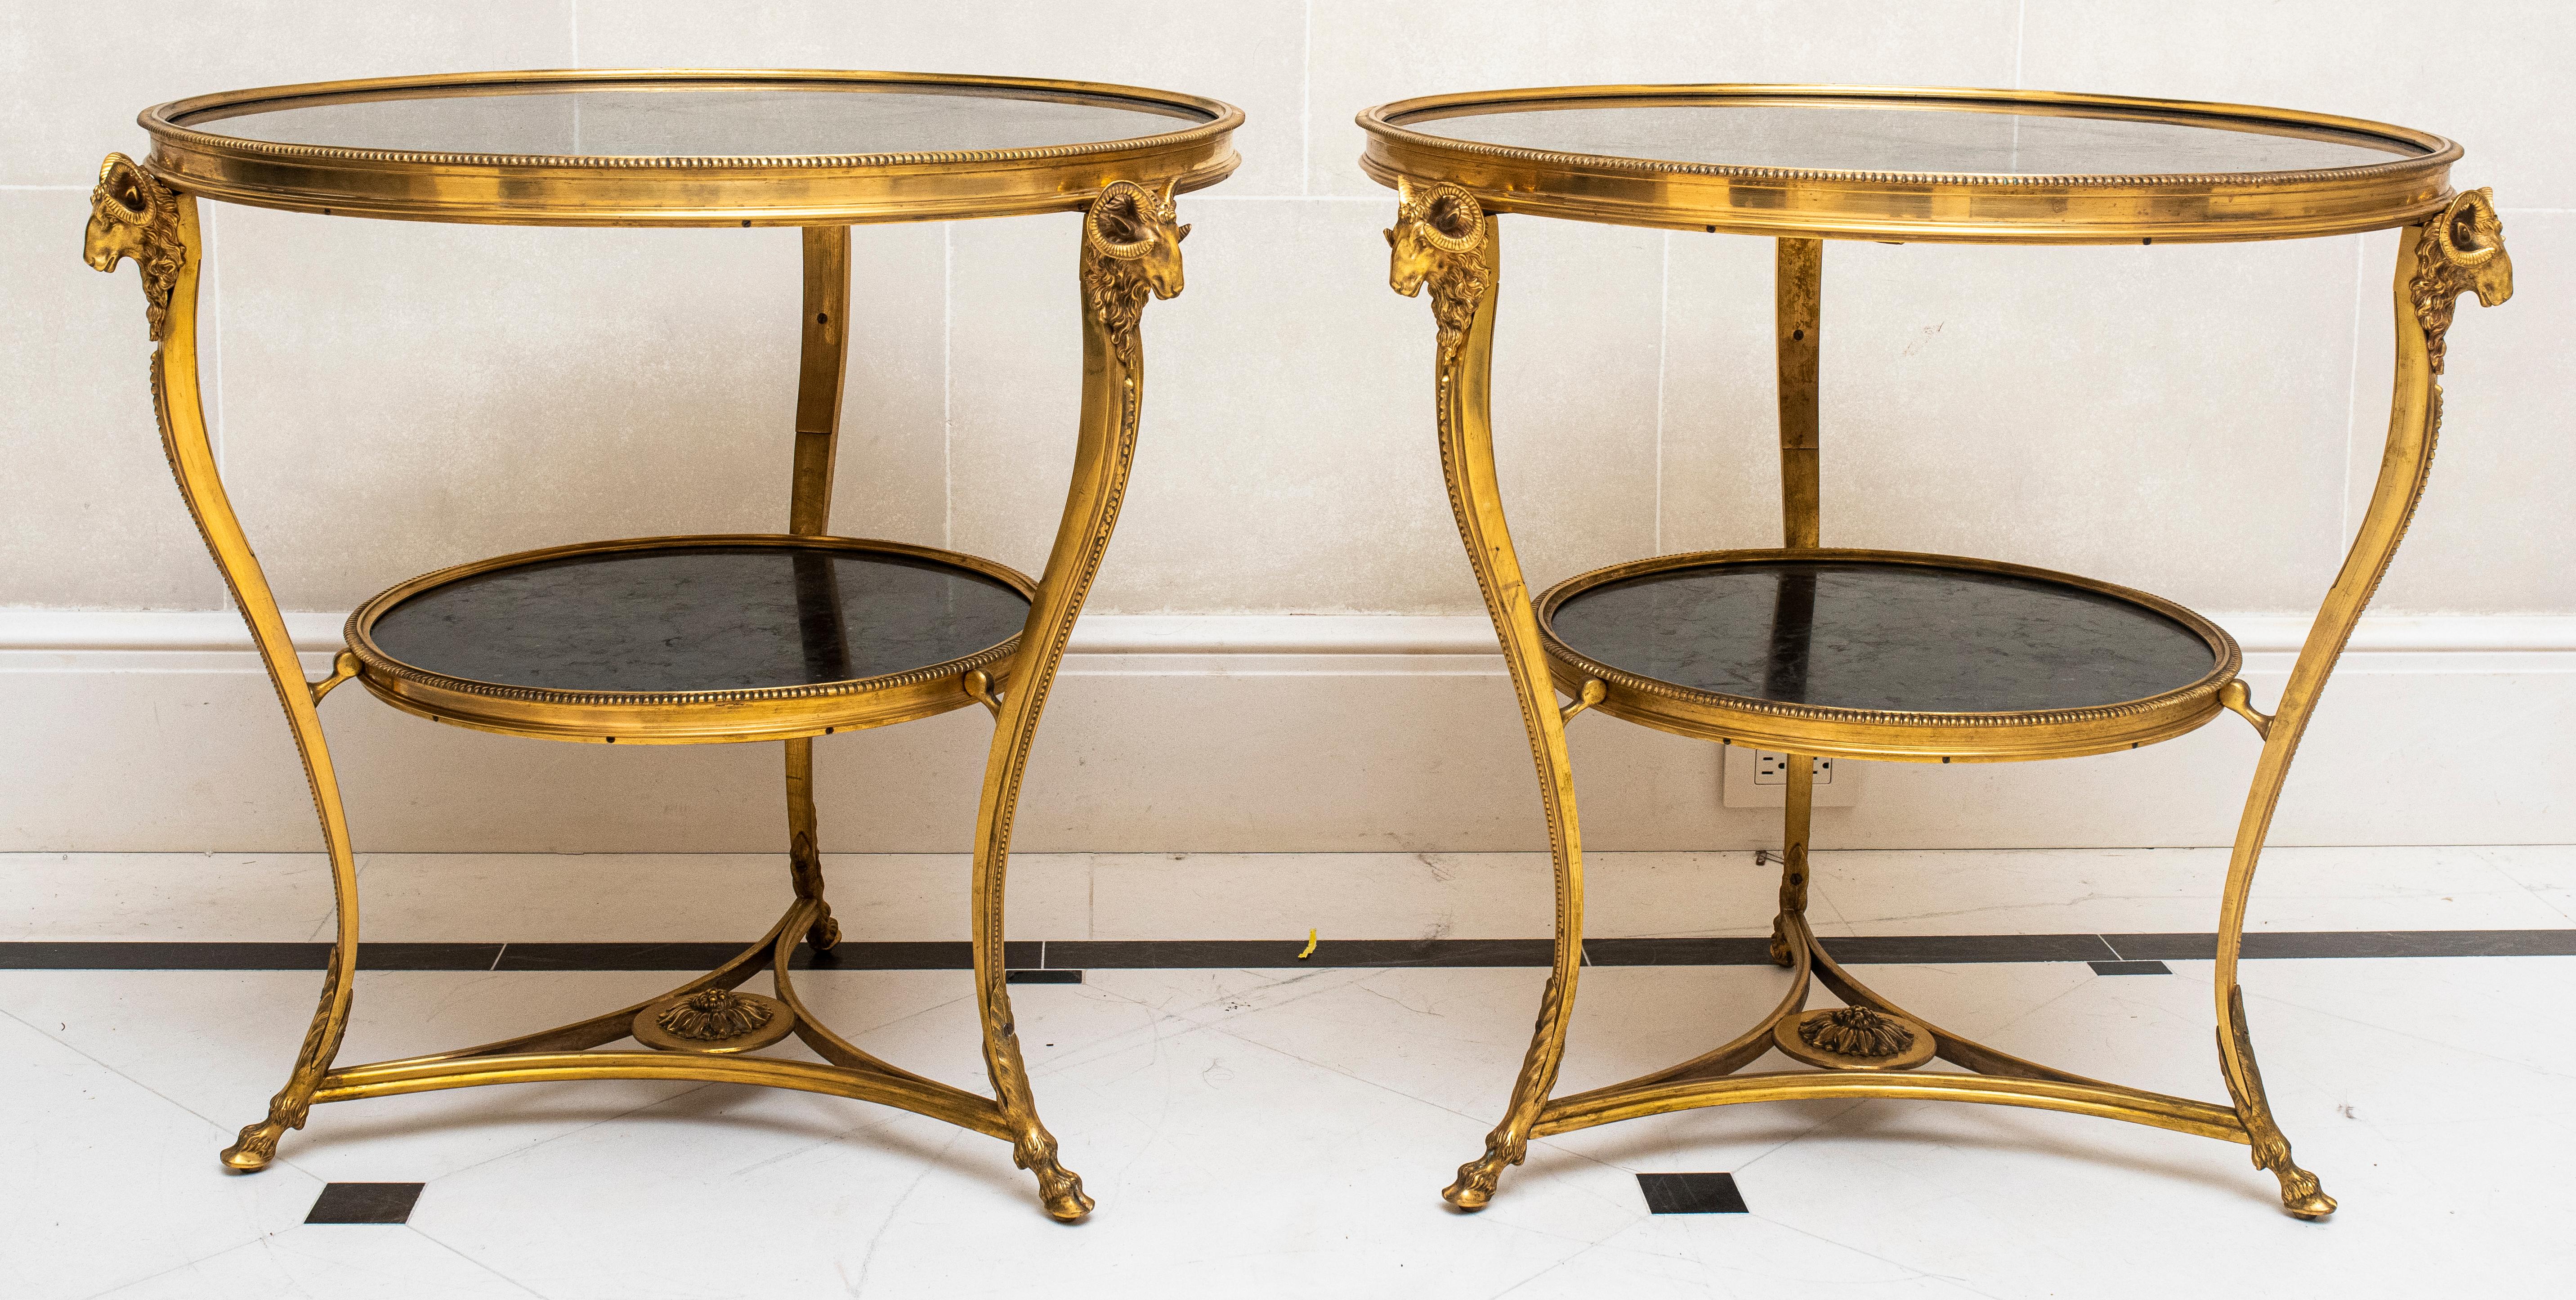 Gilt Pair of French Empire Style Gueridon Tables